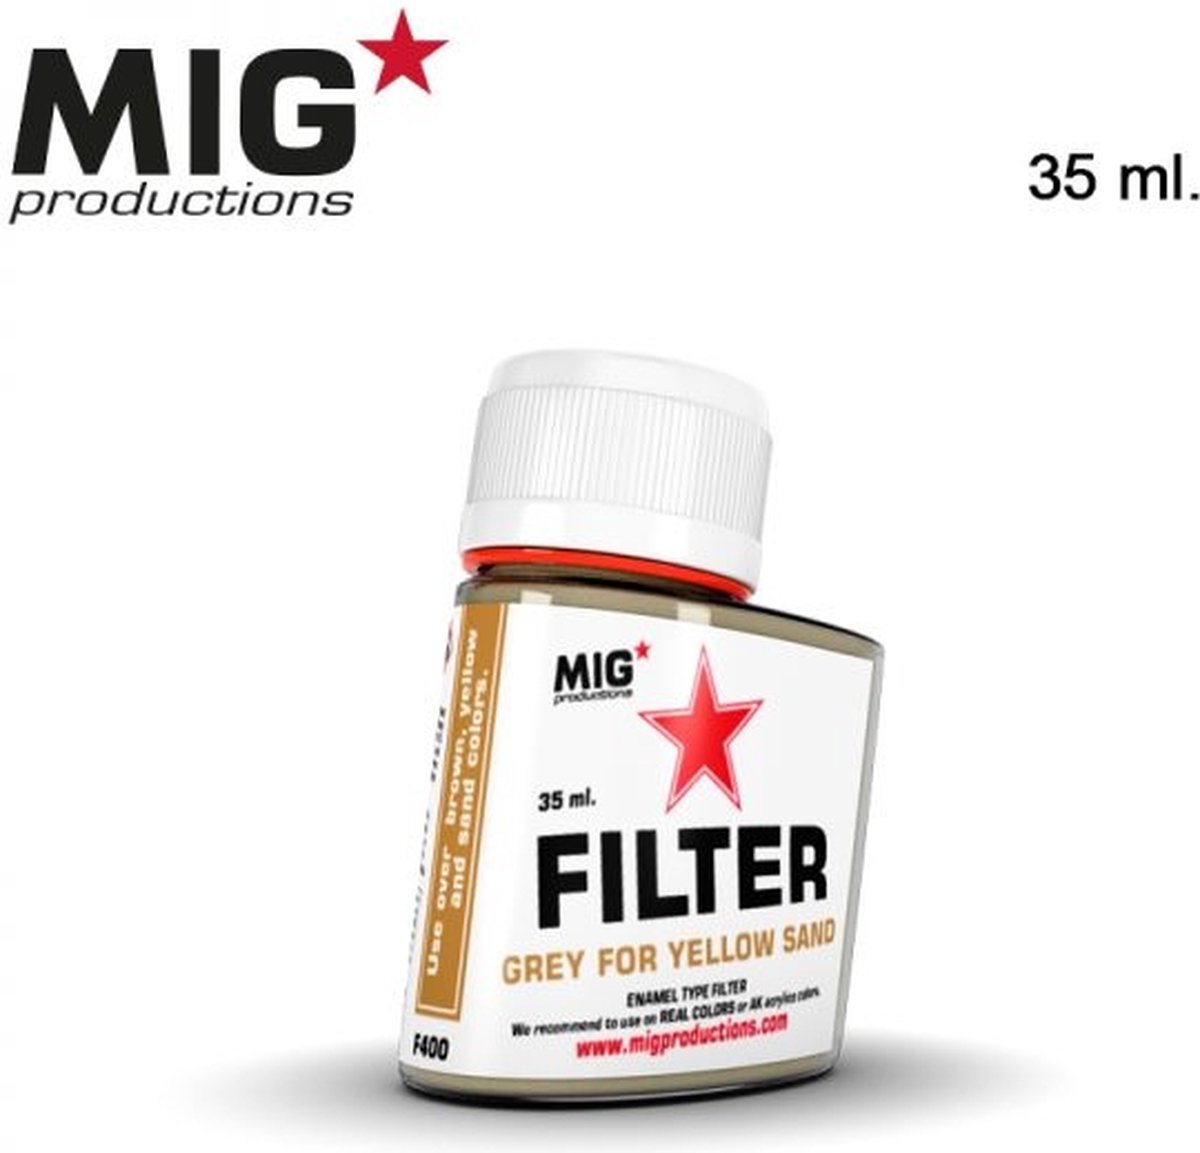 MIG Productions - F400 - Grey Filter for Yellow Sand - 35ml -